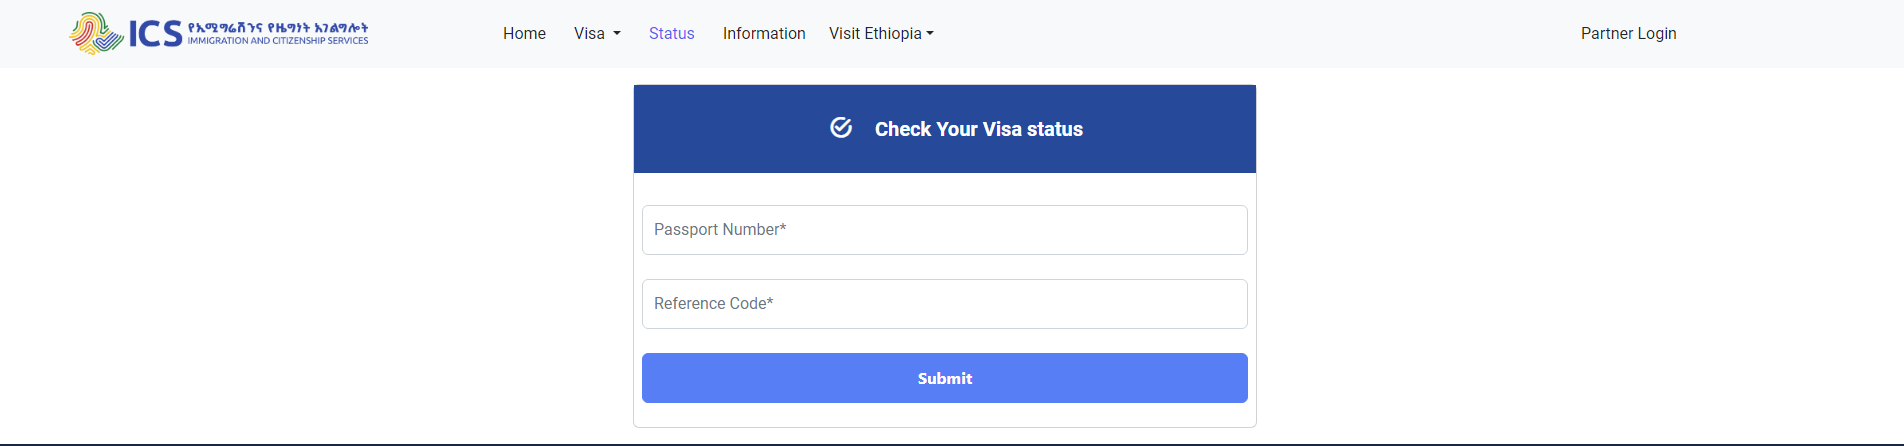 How to Check Your eVisa Application Status?